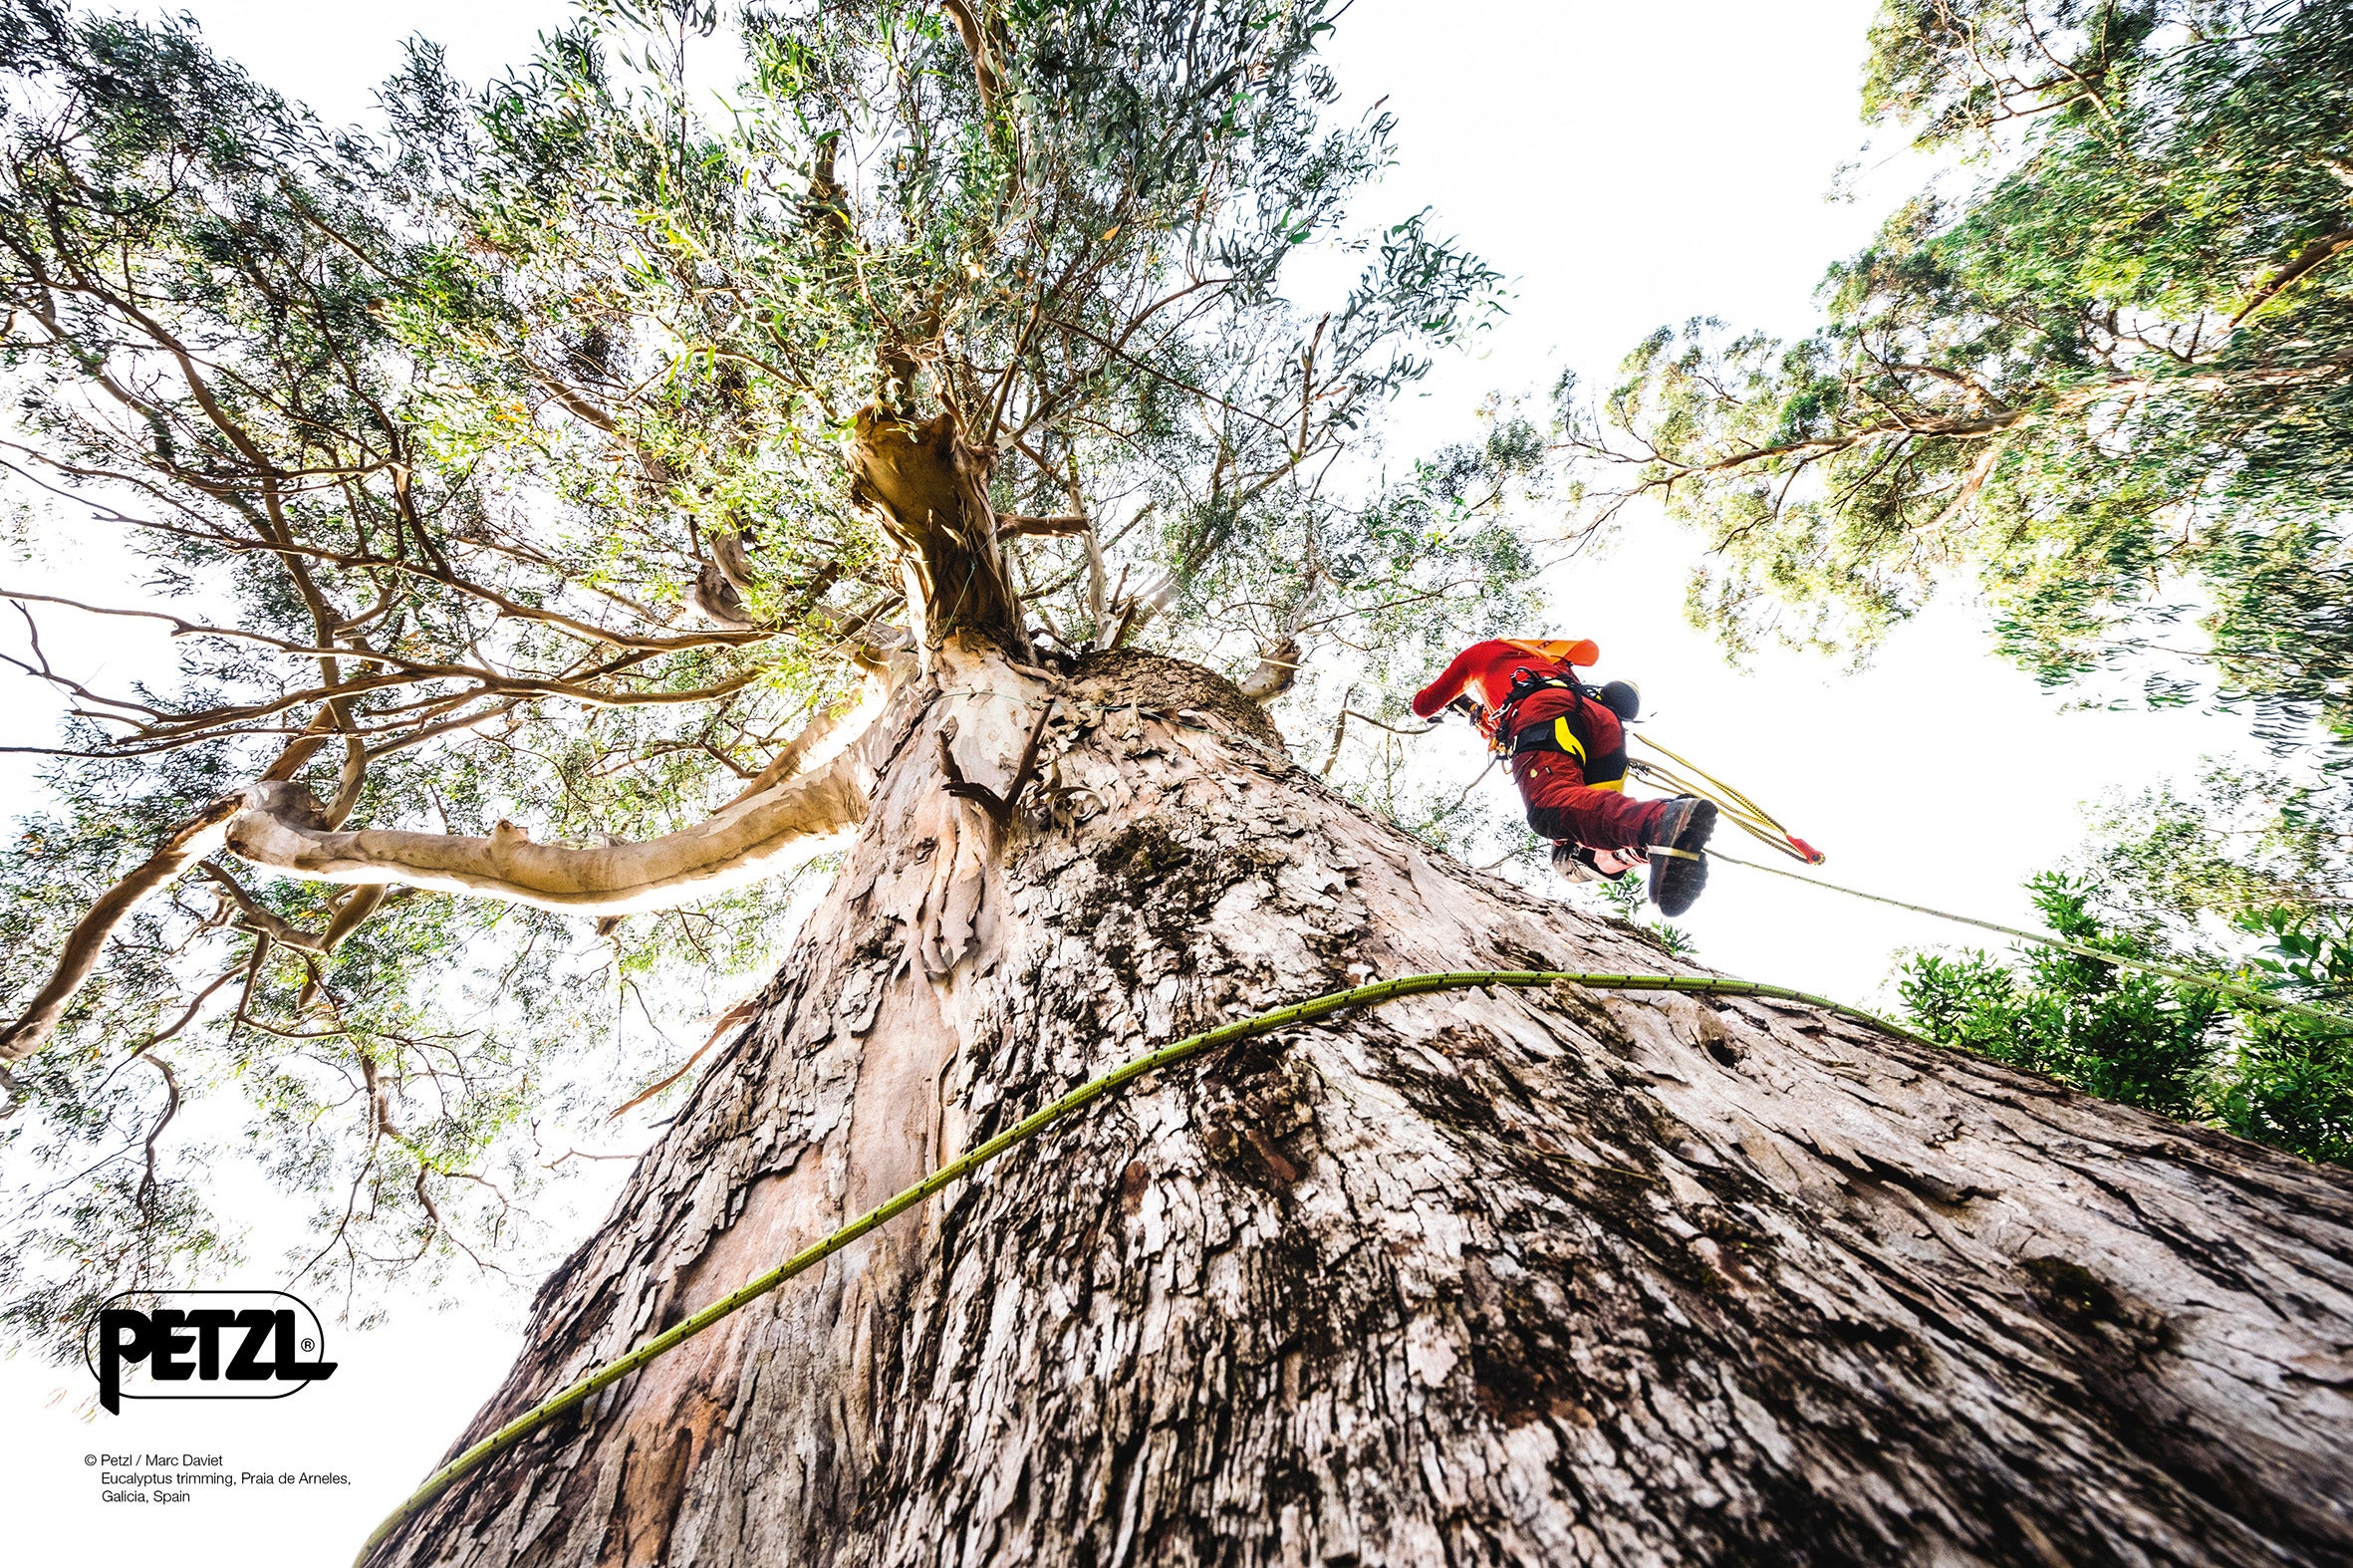 Fully Stocked Professional Arborist & Climbing Gear Store Since 1992!